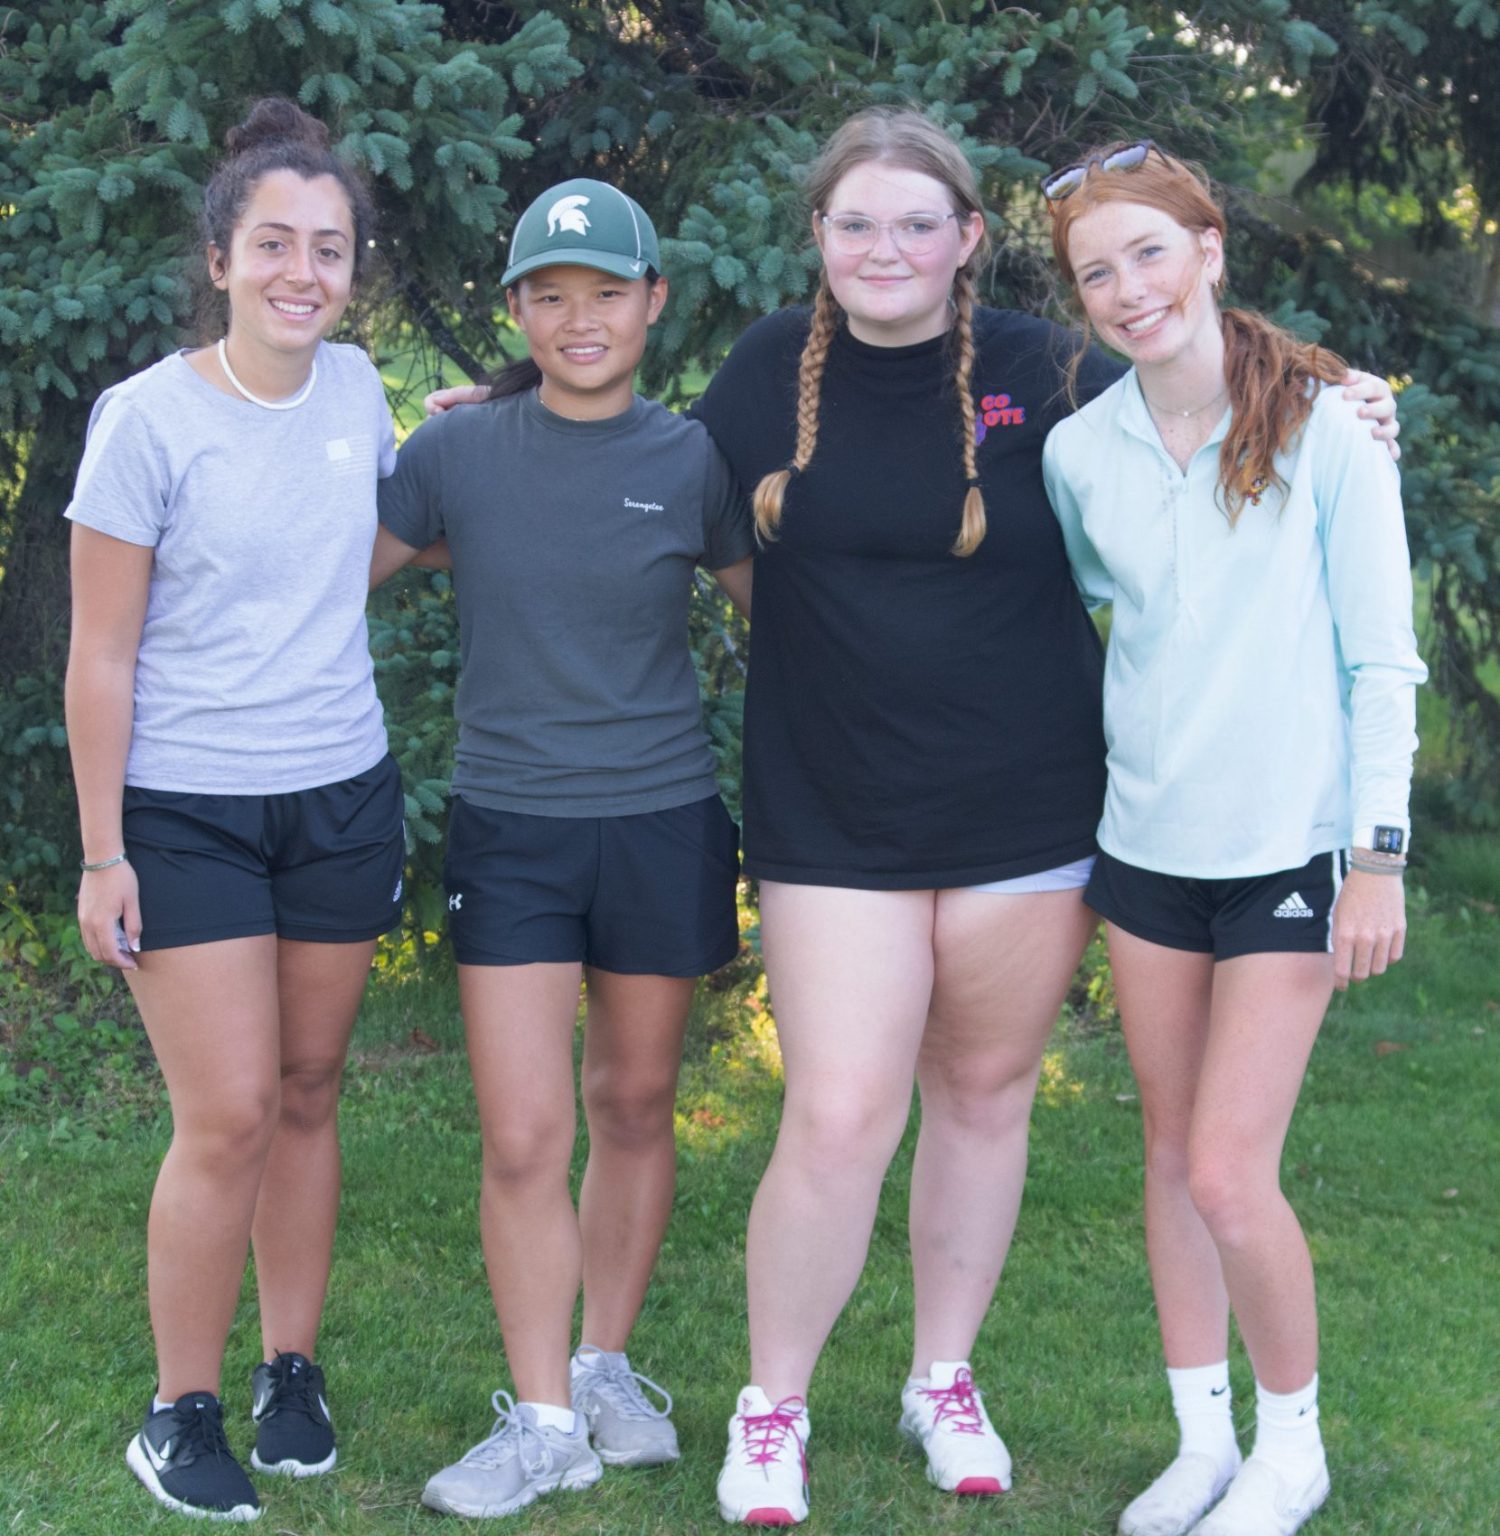 Manistee girls participate in Lady Titans Golf Invitational in Traverse City